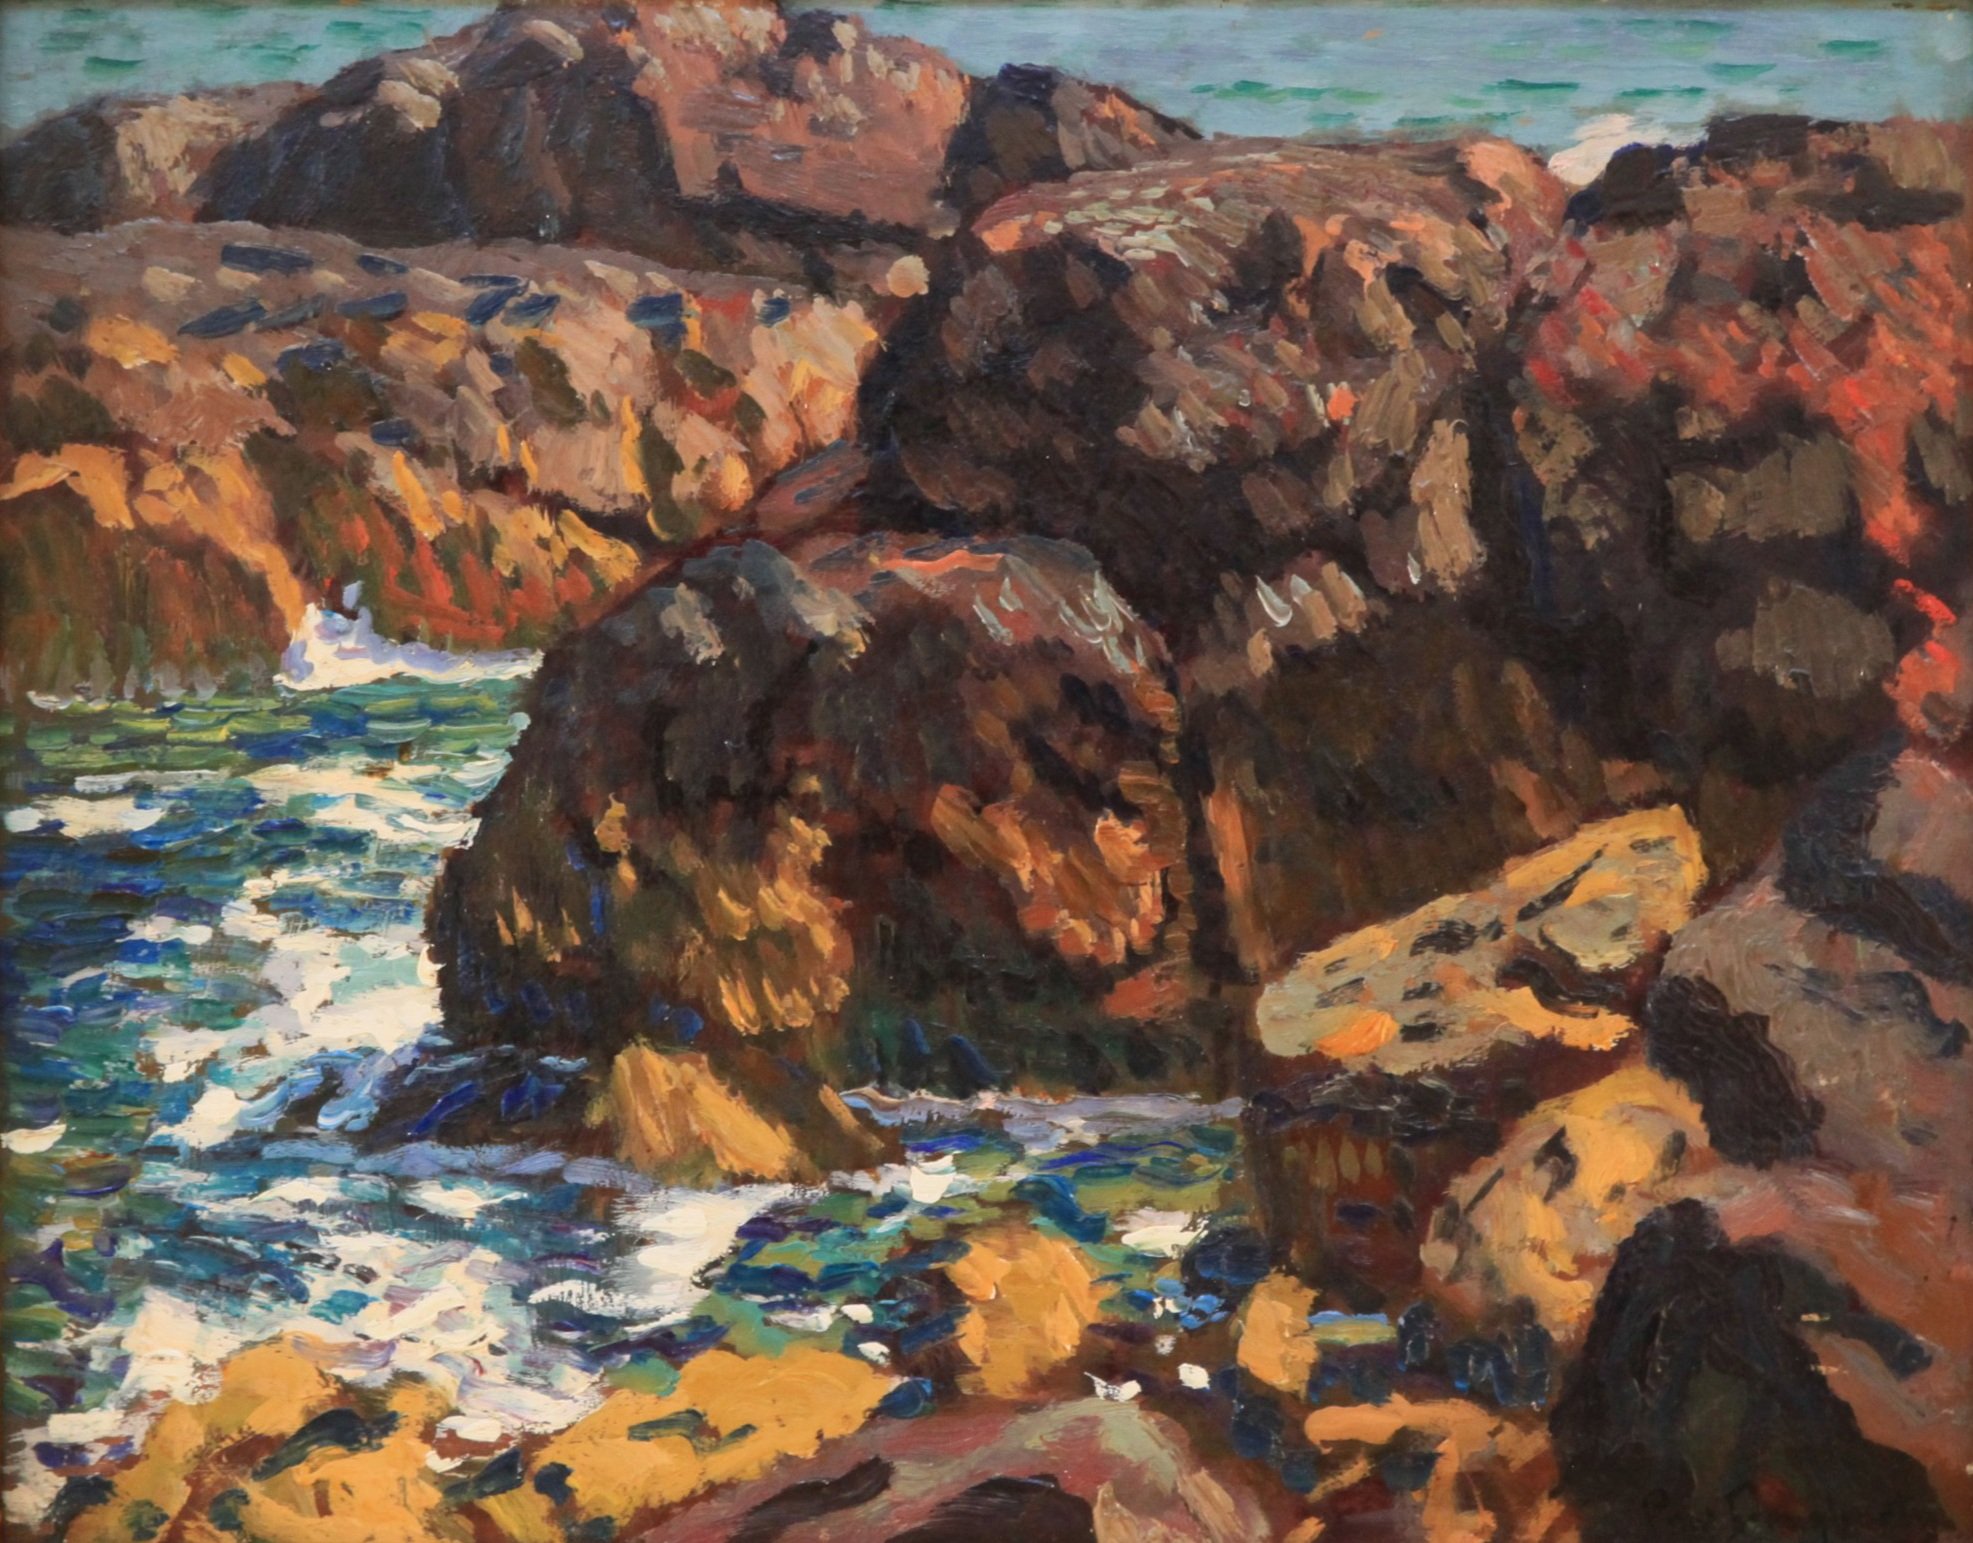  Feature Consignment:  Lot 135 - Paul Dougherty (1877-1947)   Oceanscape with Rocks  oil on board, 12.5 x 16 in. 